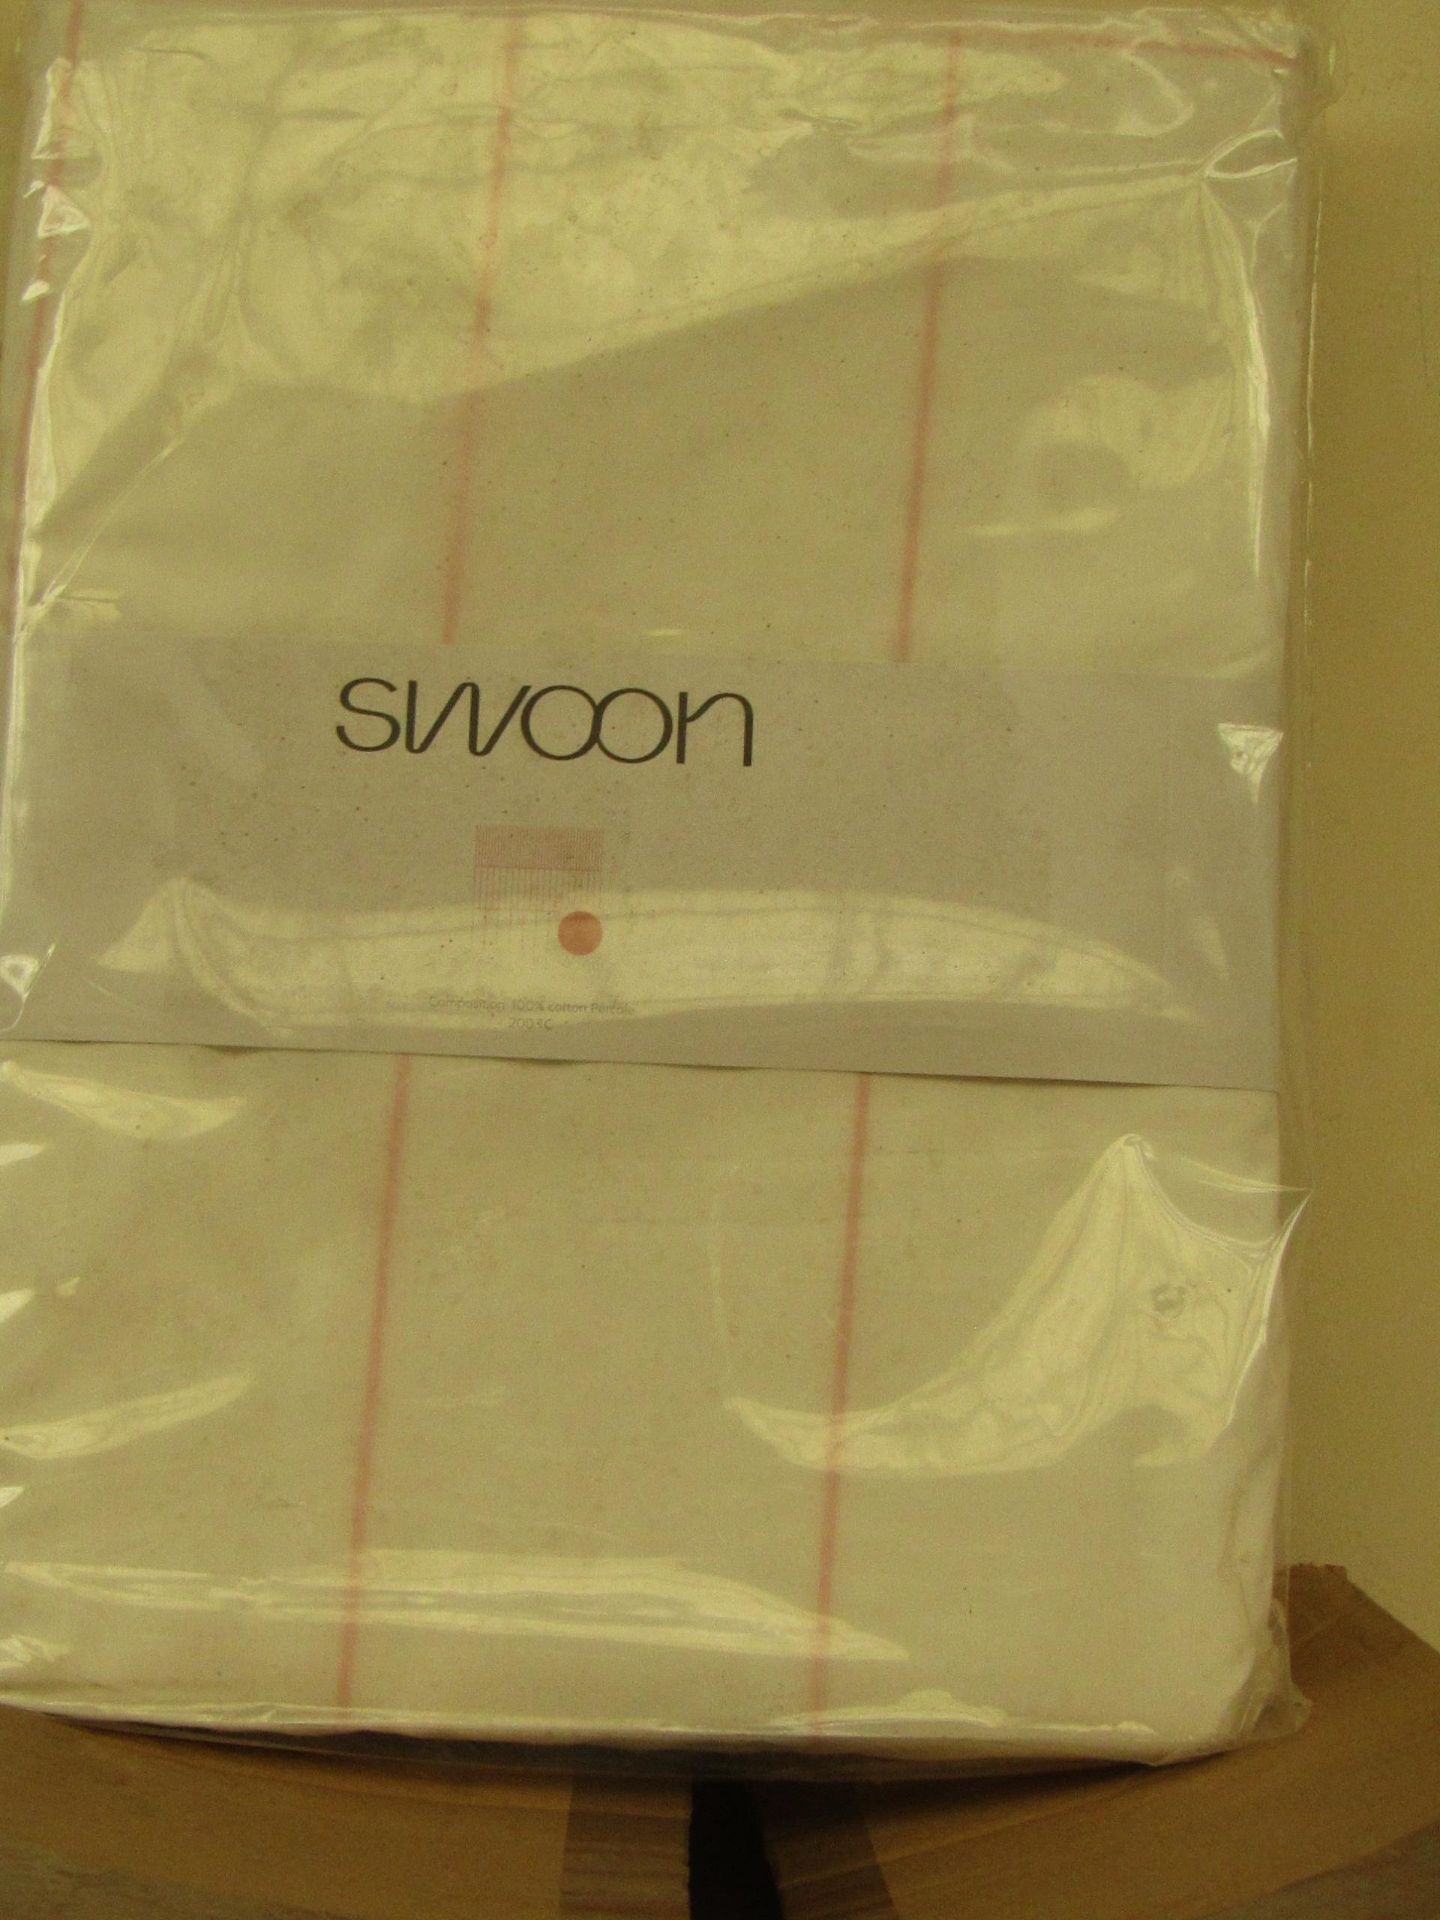 |1x SWOON BOOLE PINK KING SIZE DUVET SET THAT INCLUDE DUVET COVER AND 2 MATCHING PILLOW CASES |